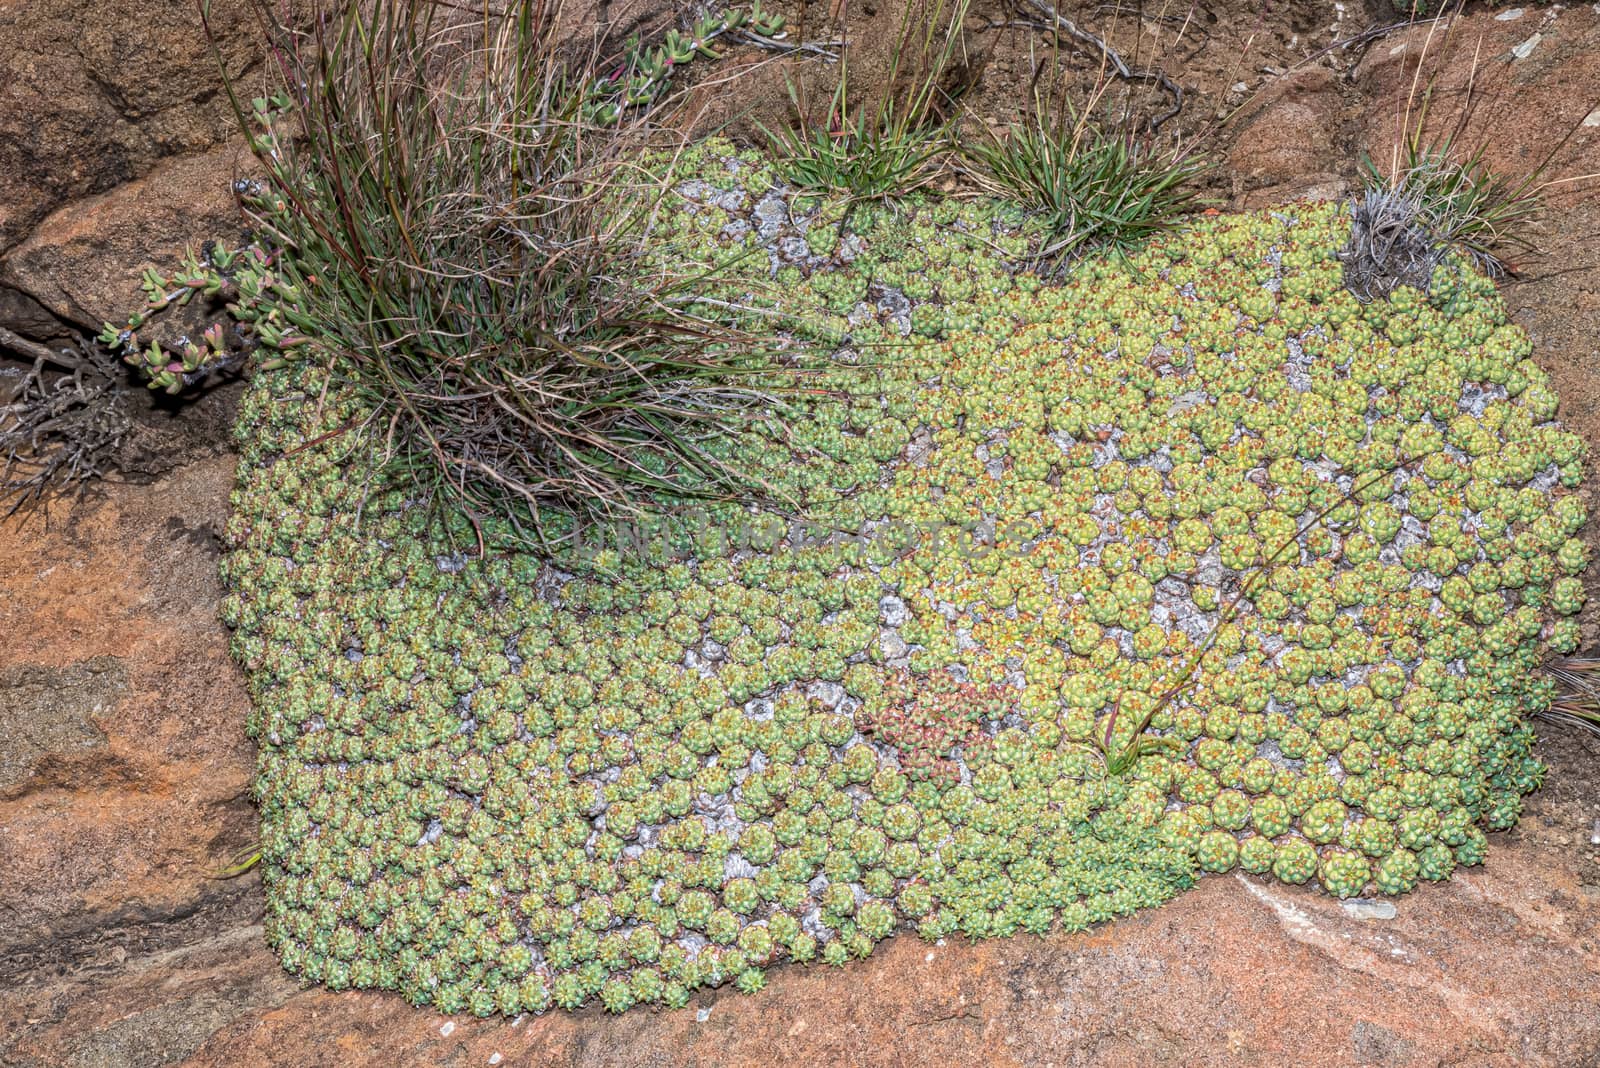 Euphorbia clavarioides, a low growing succulent plant, at Golden Gate in the Free State Province